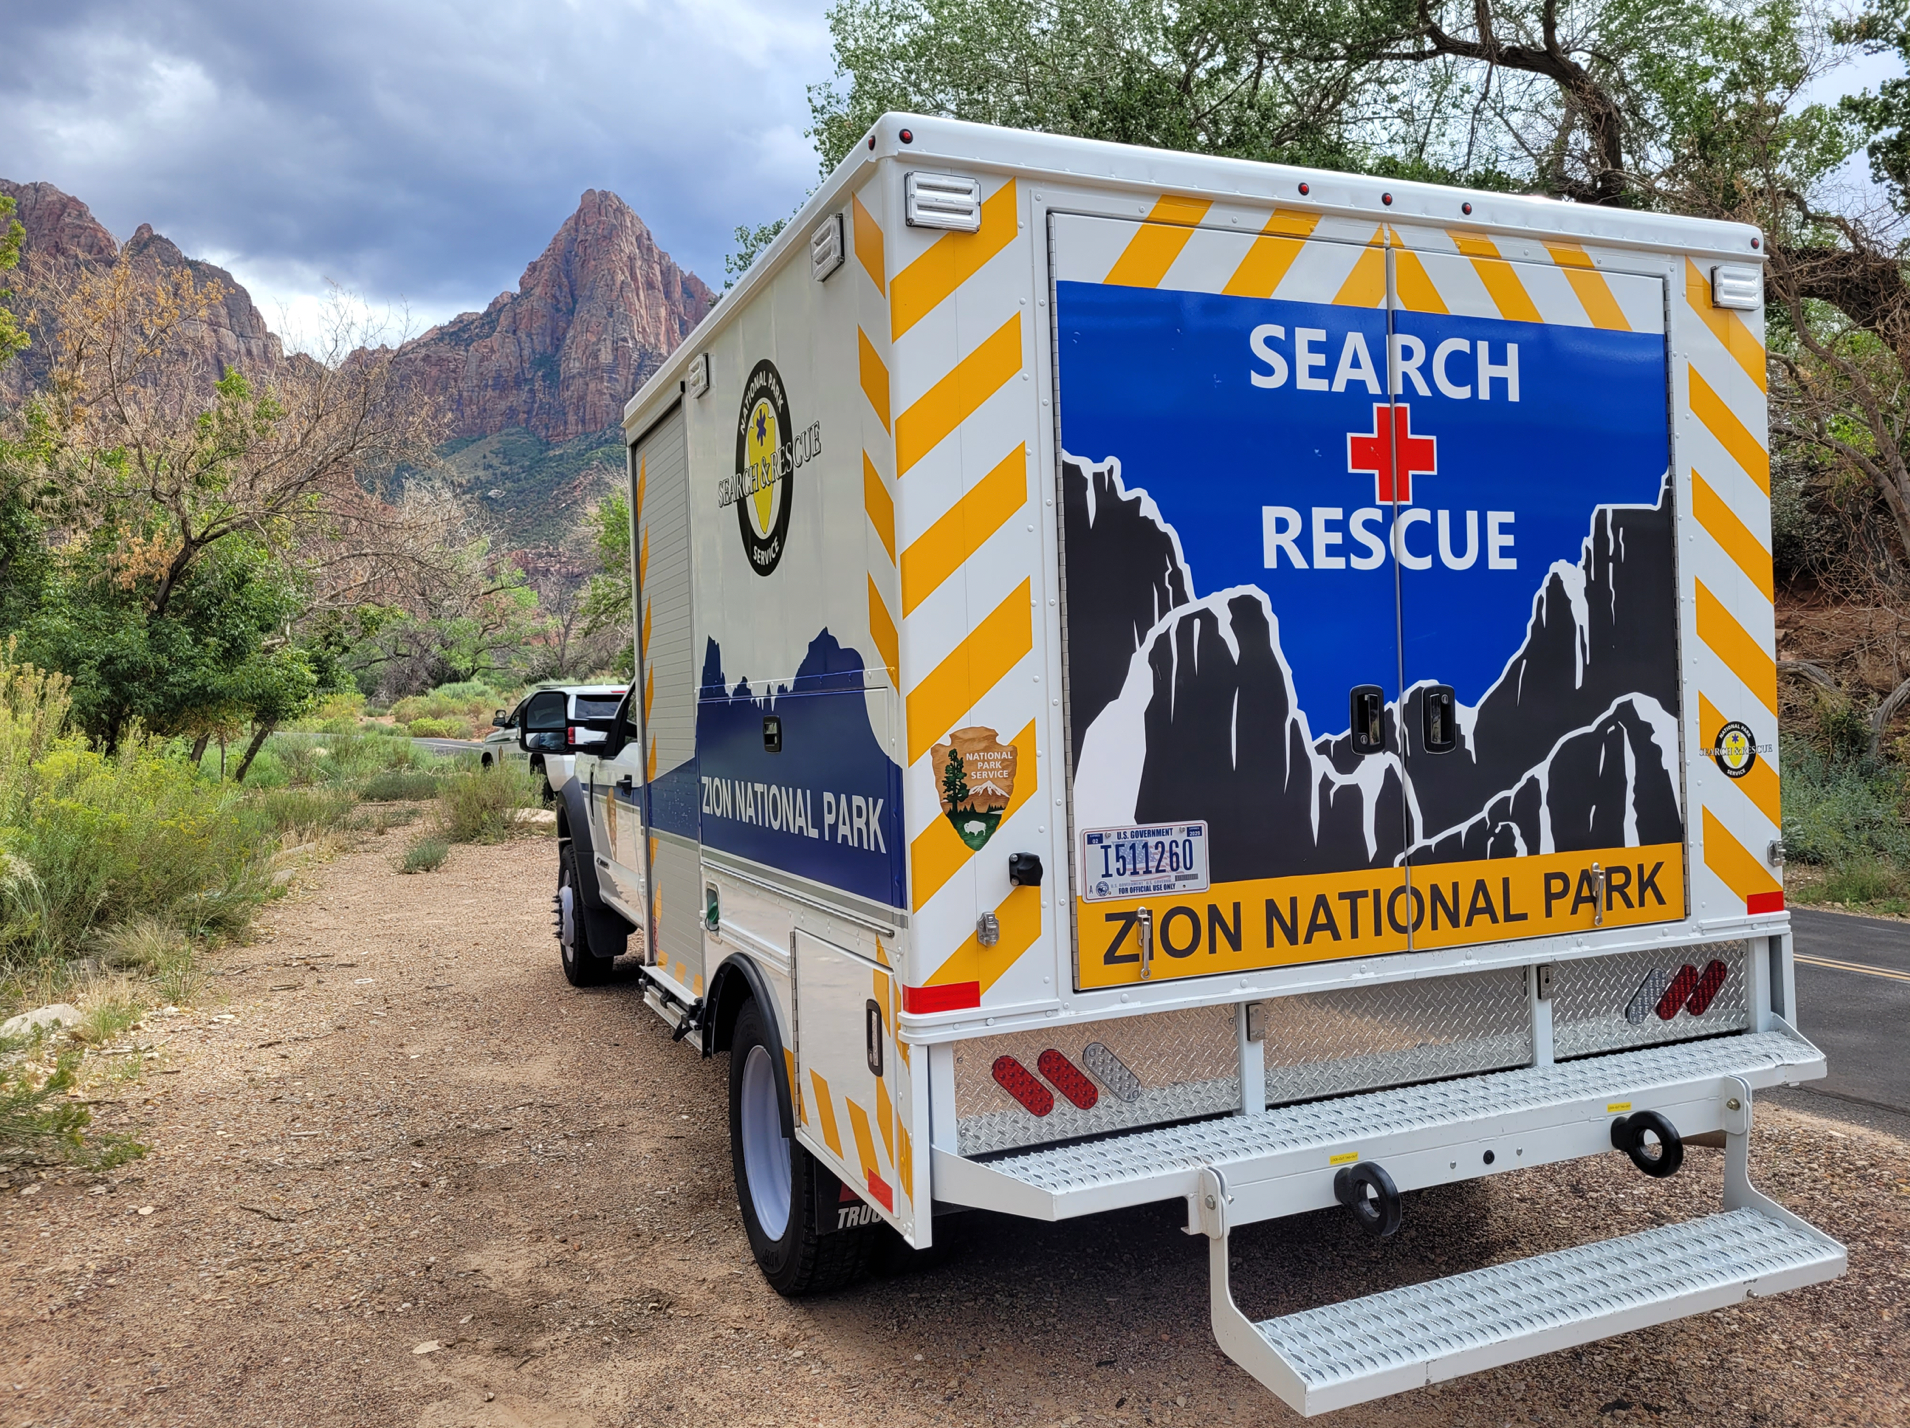 Search and rescue teams found a woman unresponsive and suffering from hypothermia in Zion National Park (file photo)